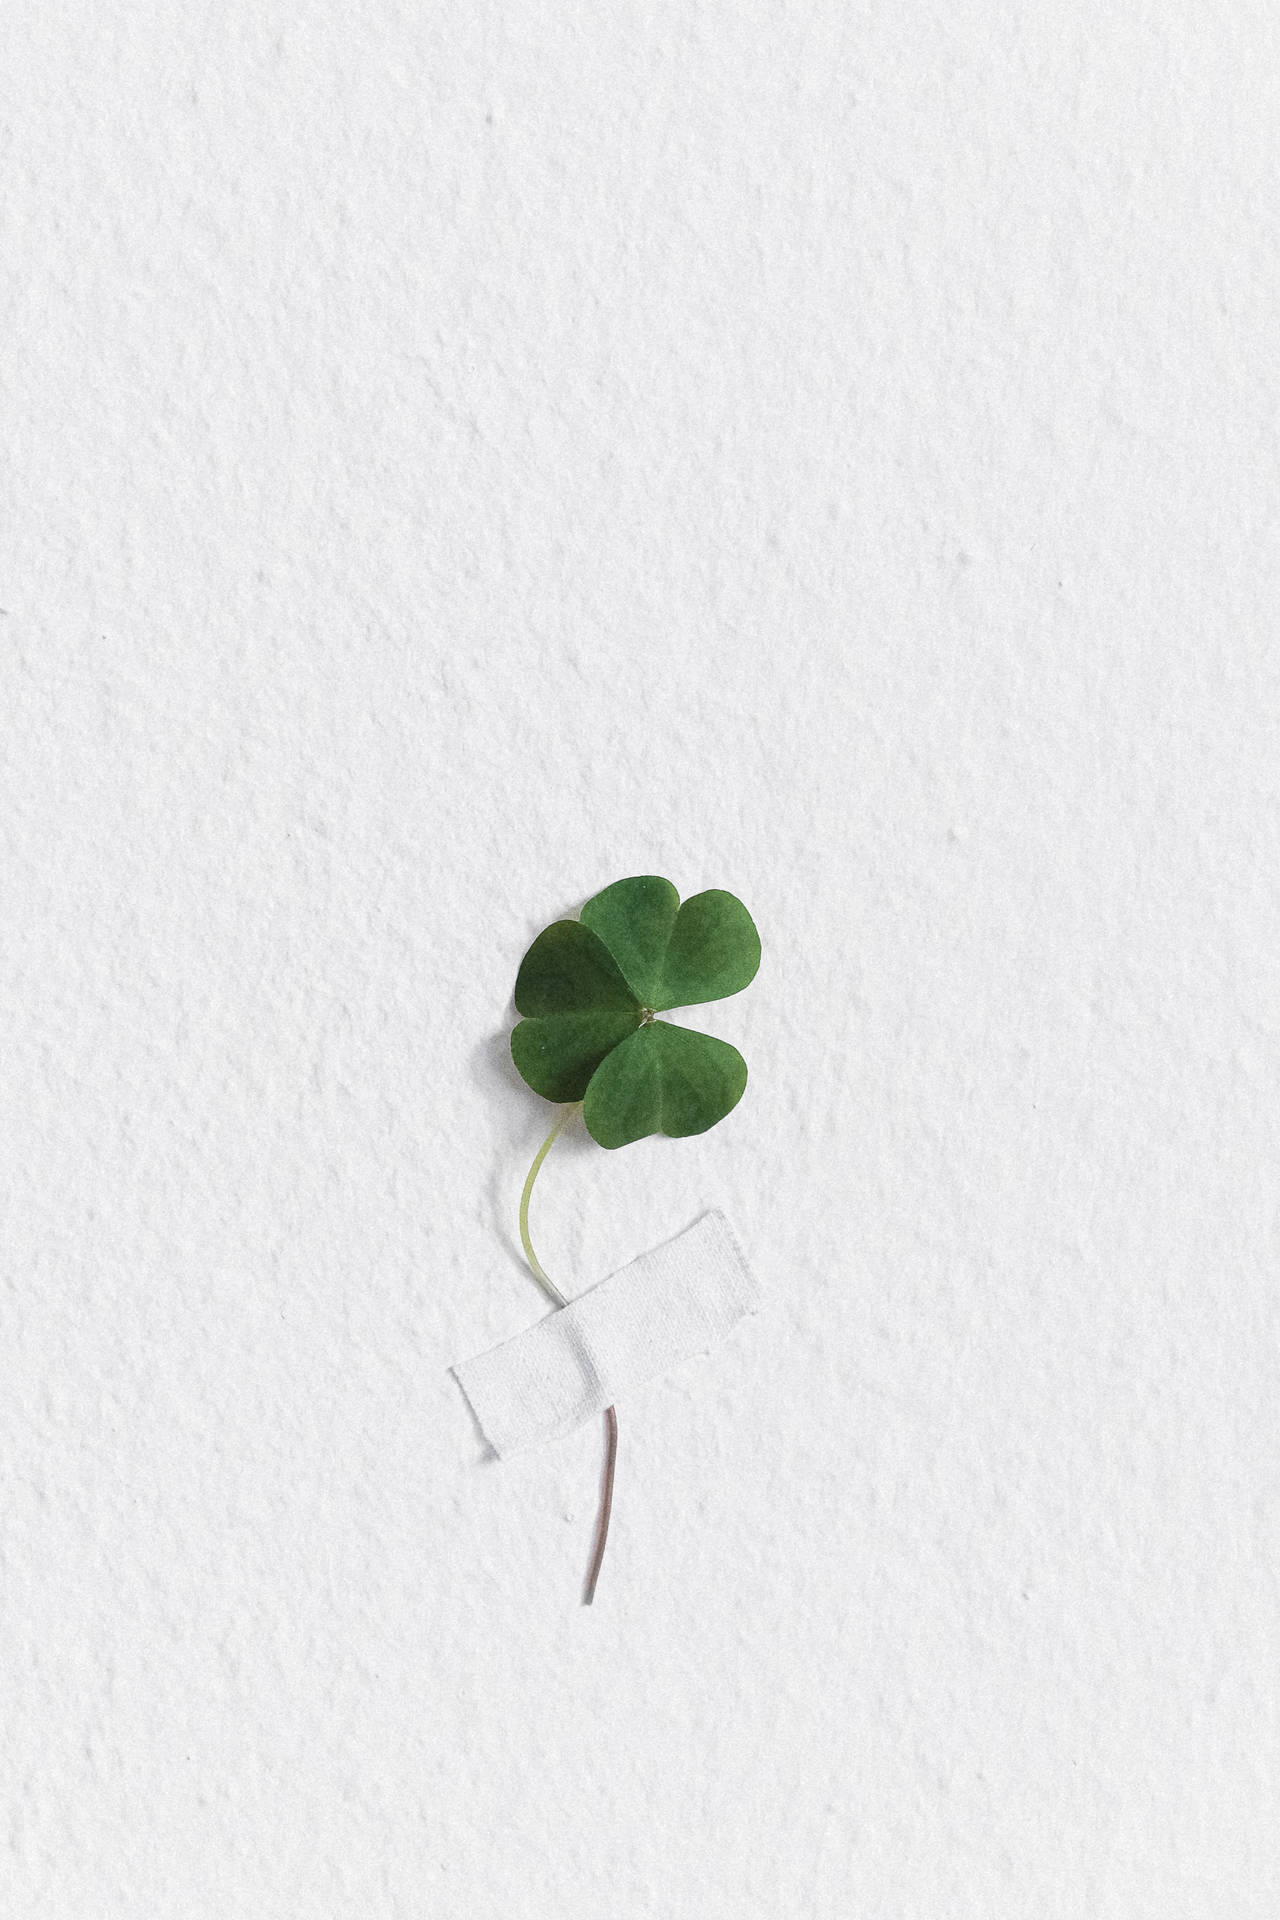 Small Clover On White Background